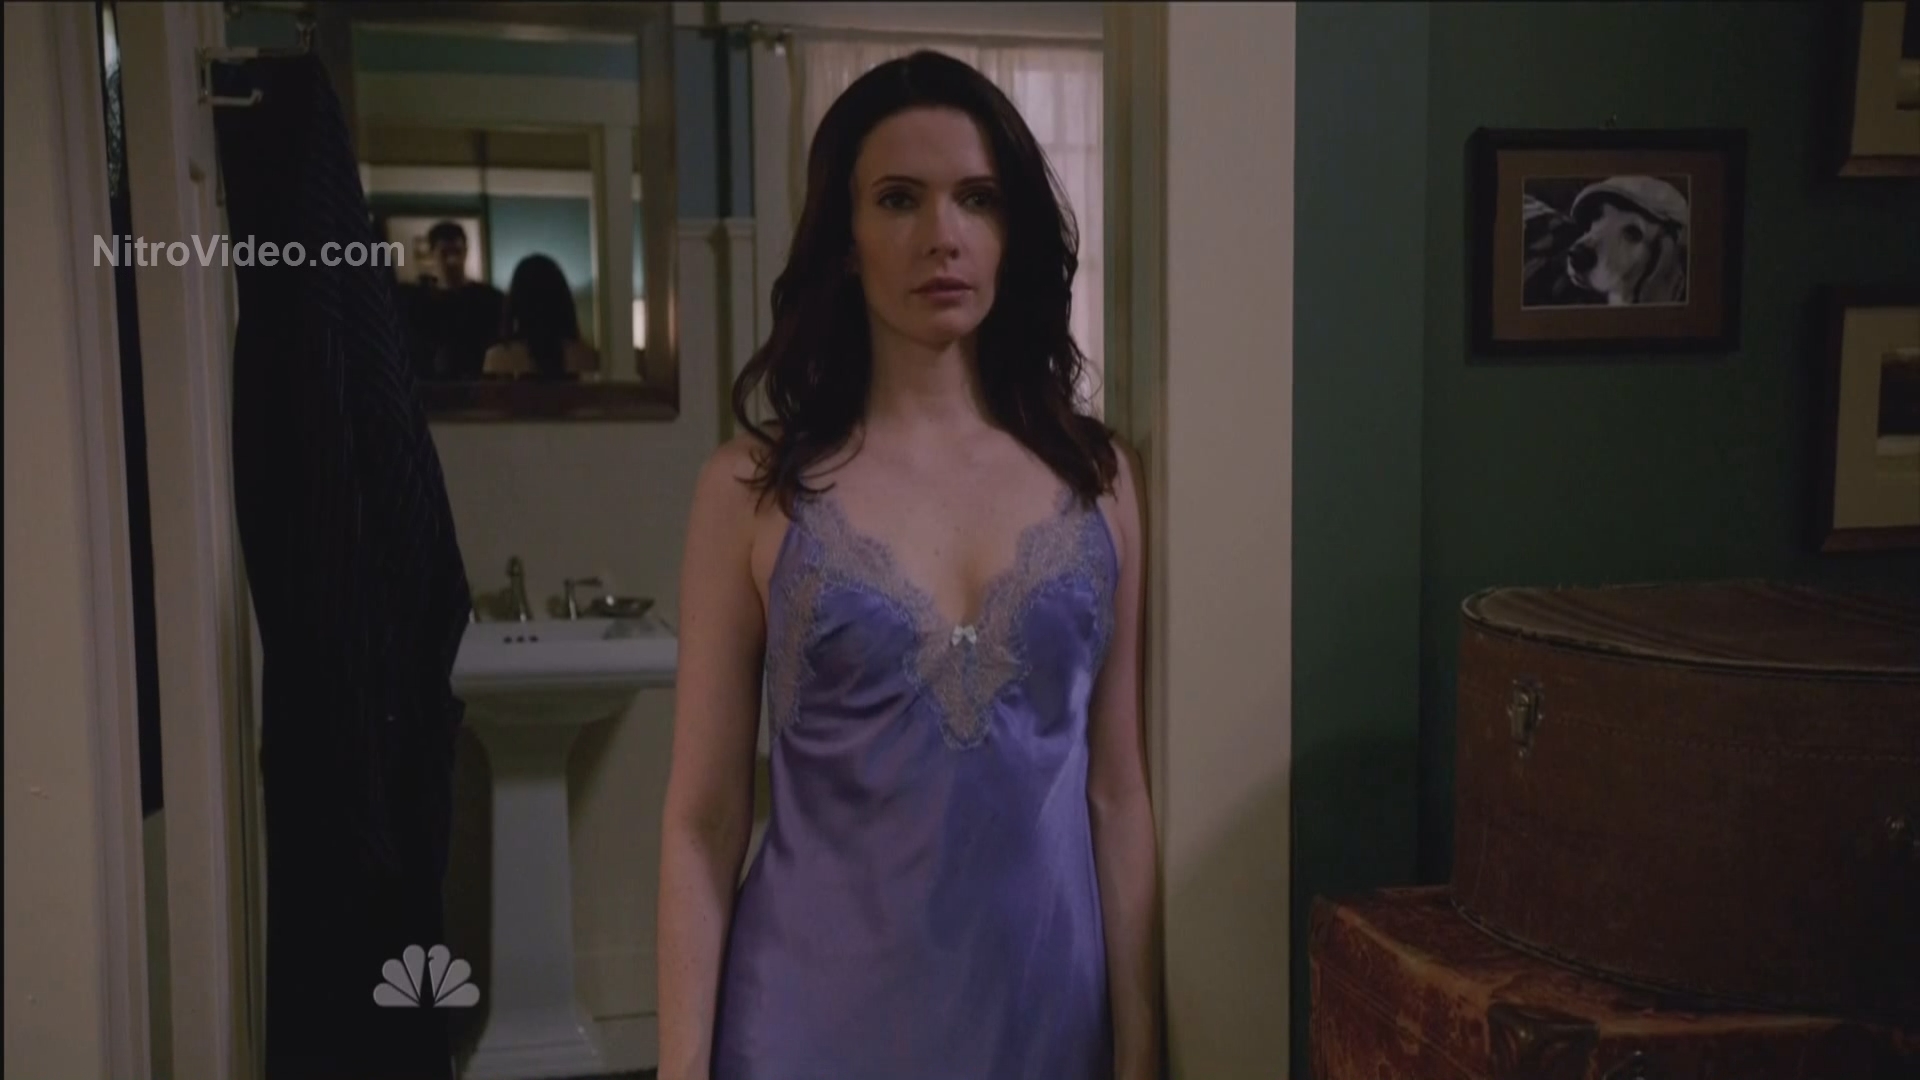 Bitsie Tulloch nude or sexy in Grimm: Blonde Ambition - Video Clip #01.